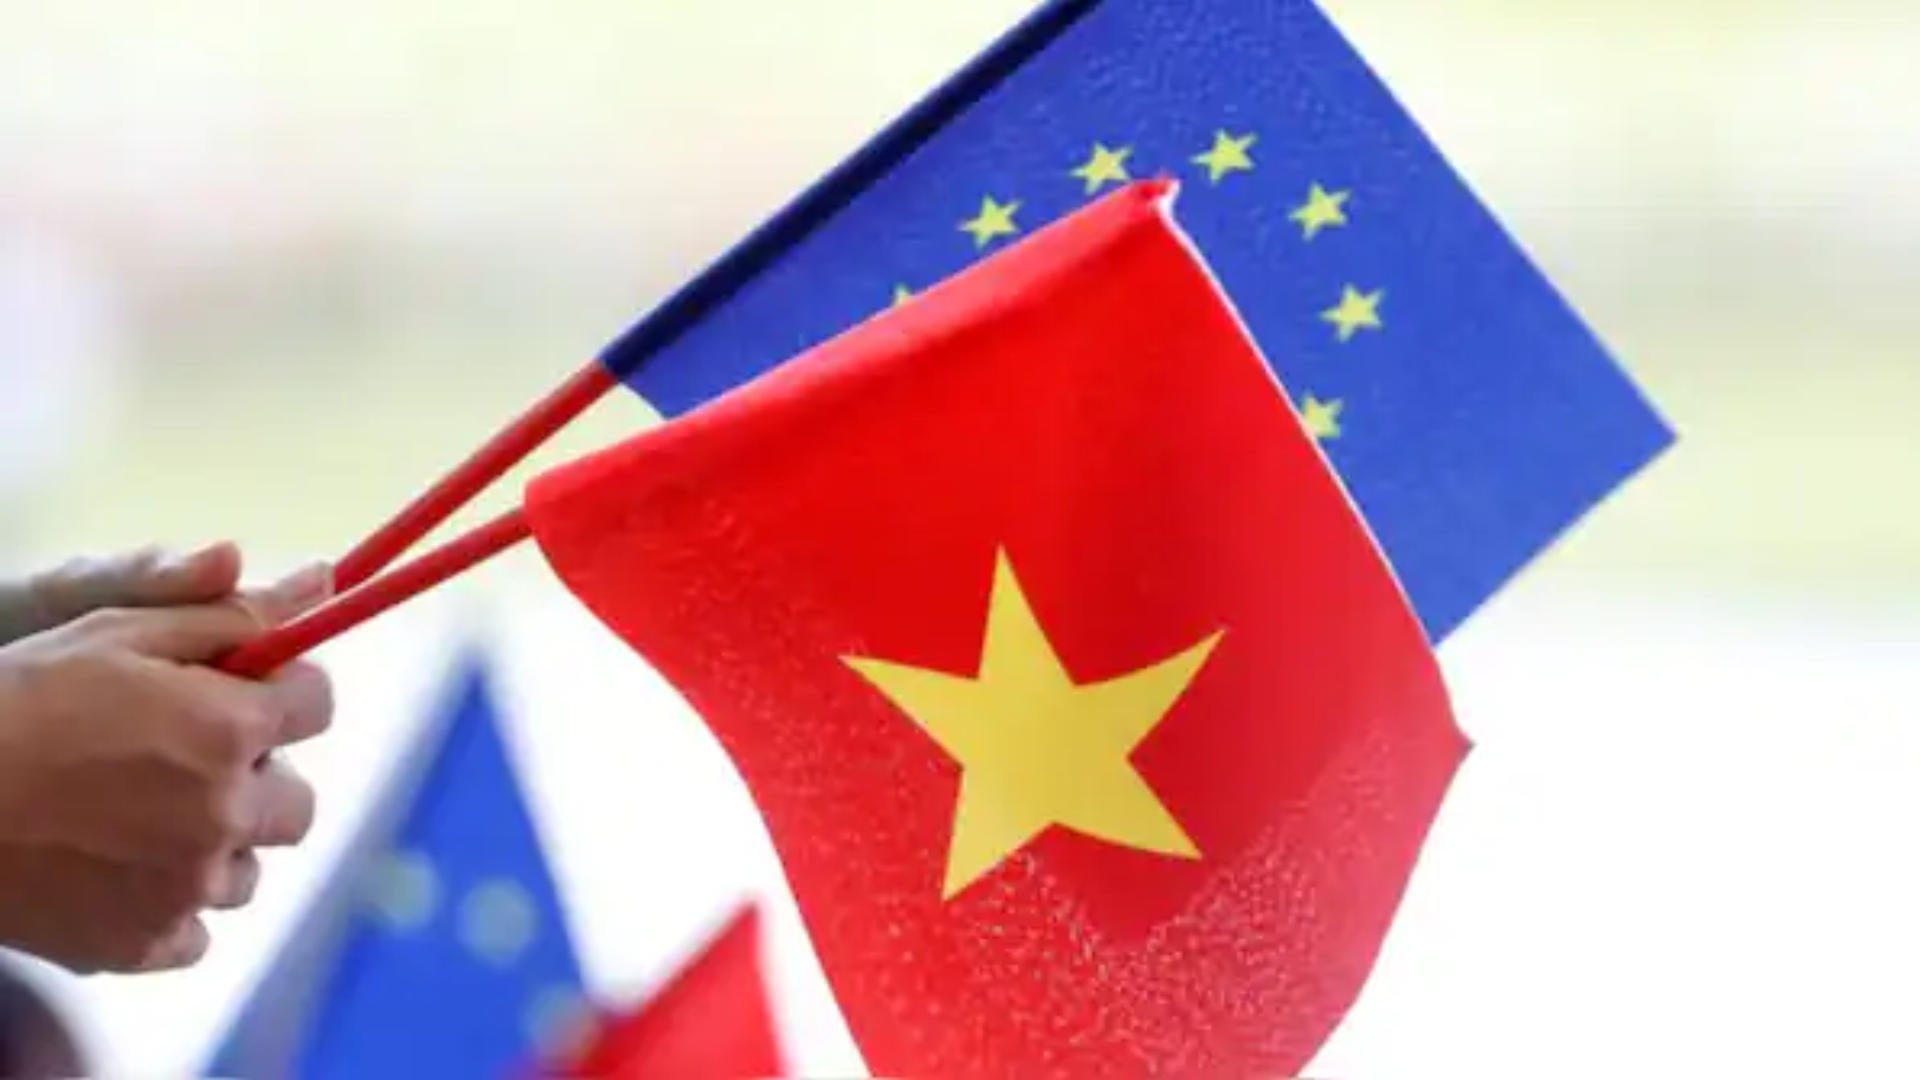 Is Vietnam’s Delay in Meeting EU Official a Sign of Strained Relations over Russian Sanctions?